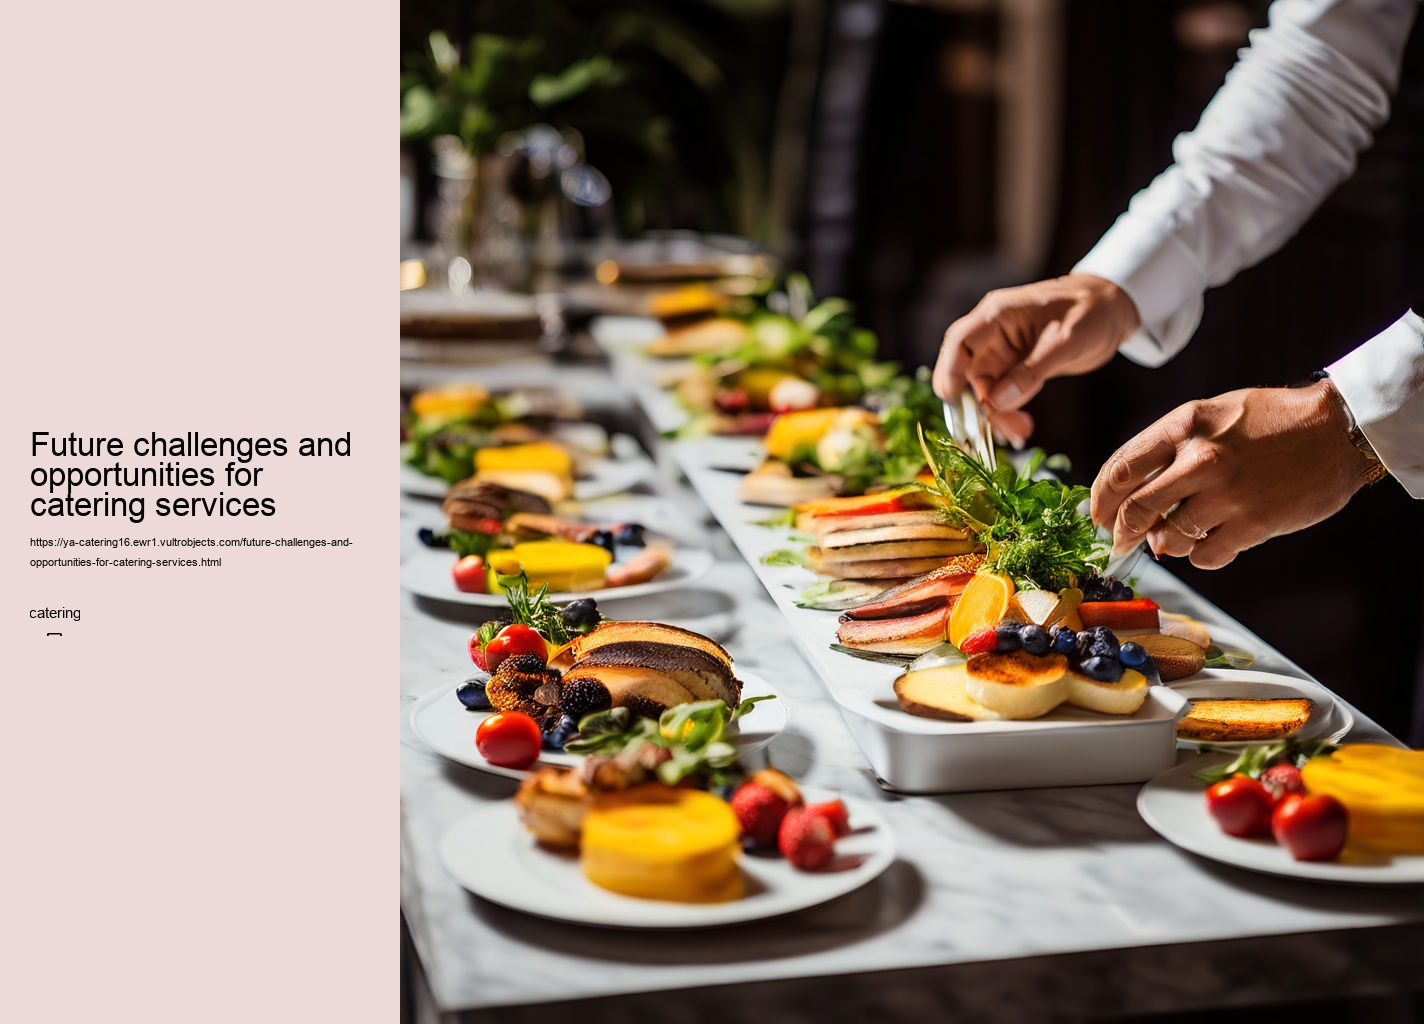 Future challenges and opportunities for catering services